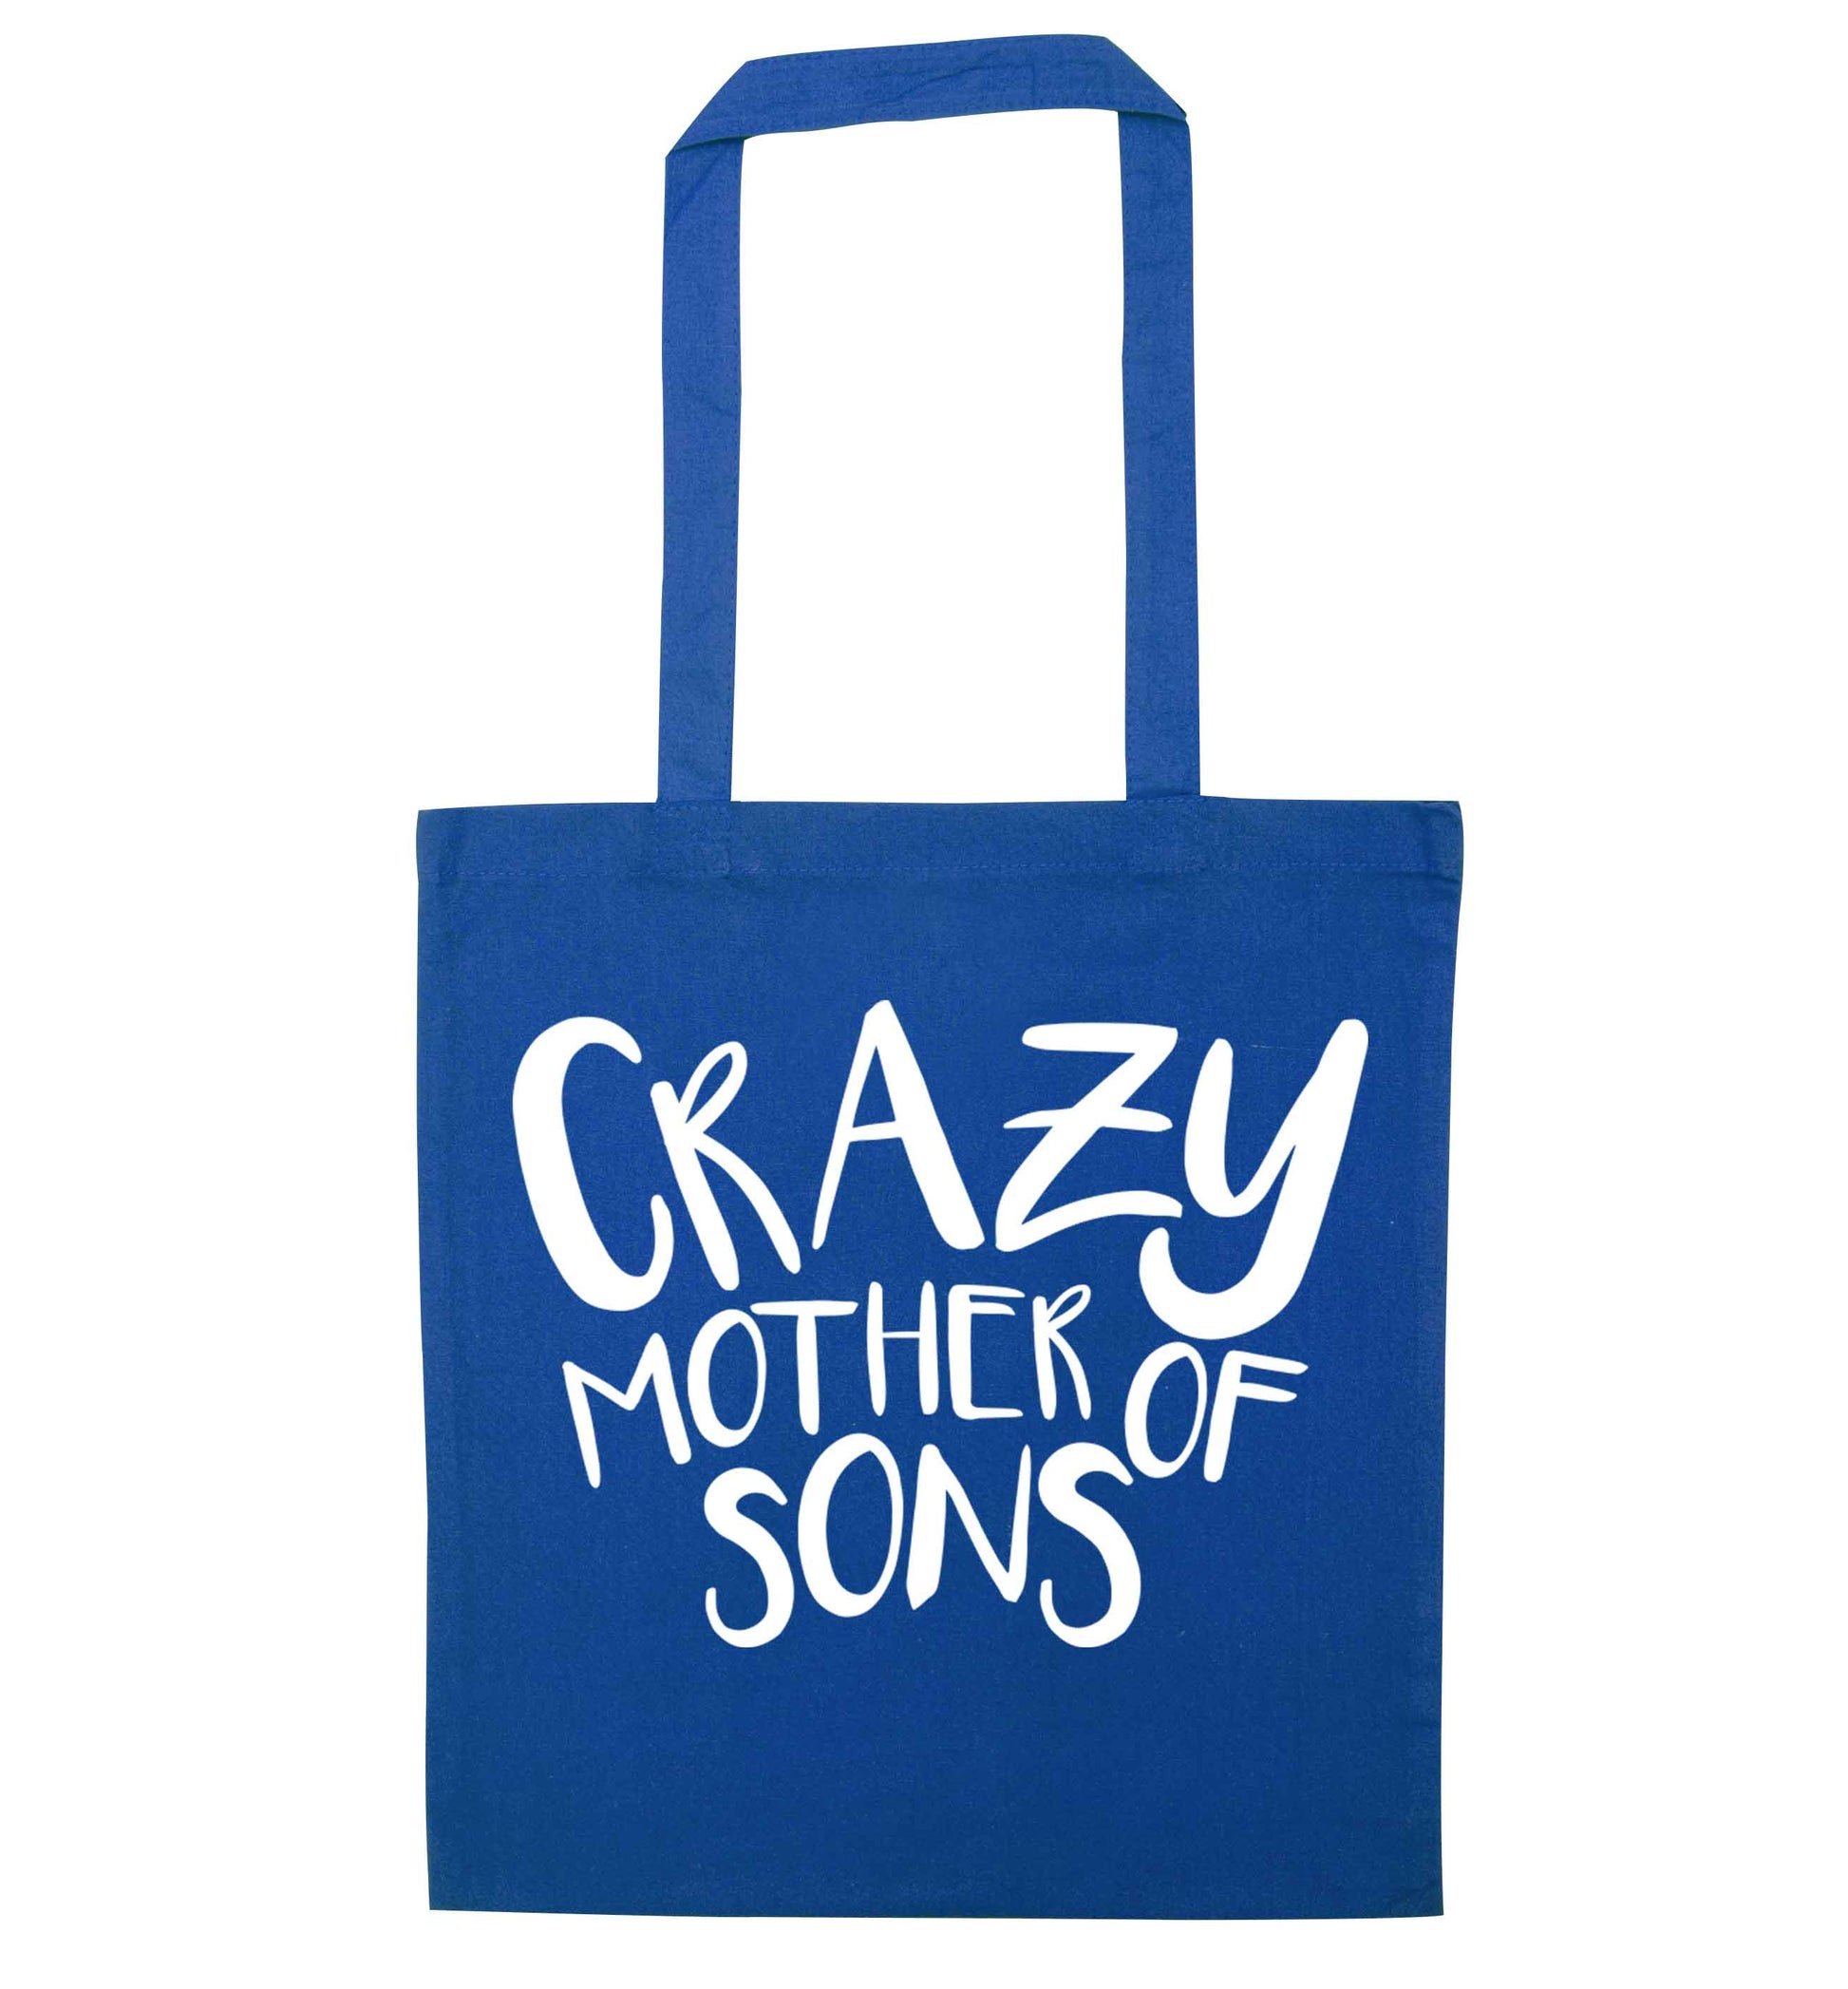 Crazy mother of sons blue tote bag